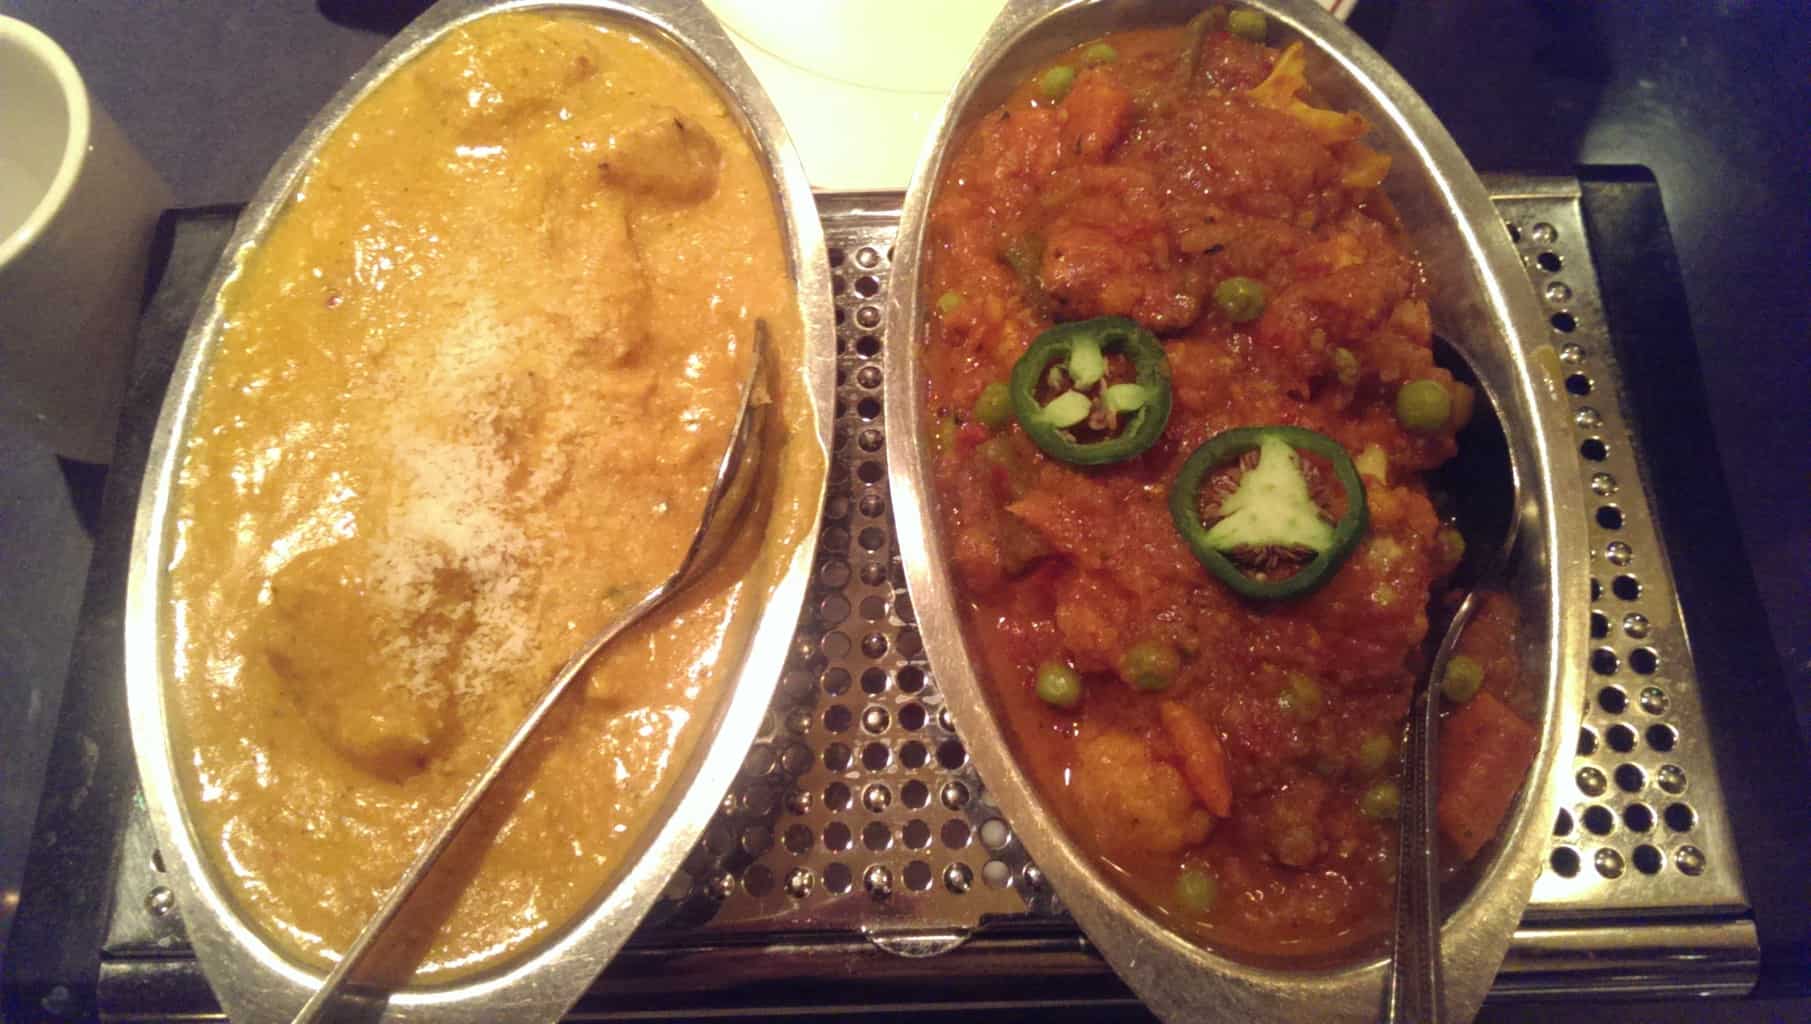 Coconut Chicken Curry (left) and Vegetable Vindaloo (right)